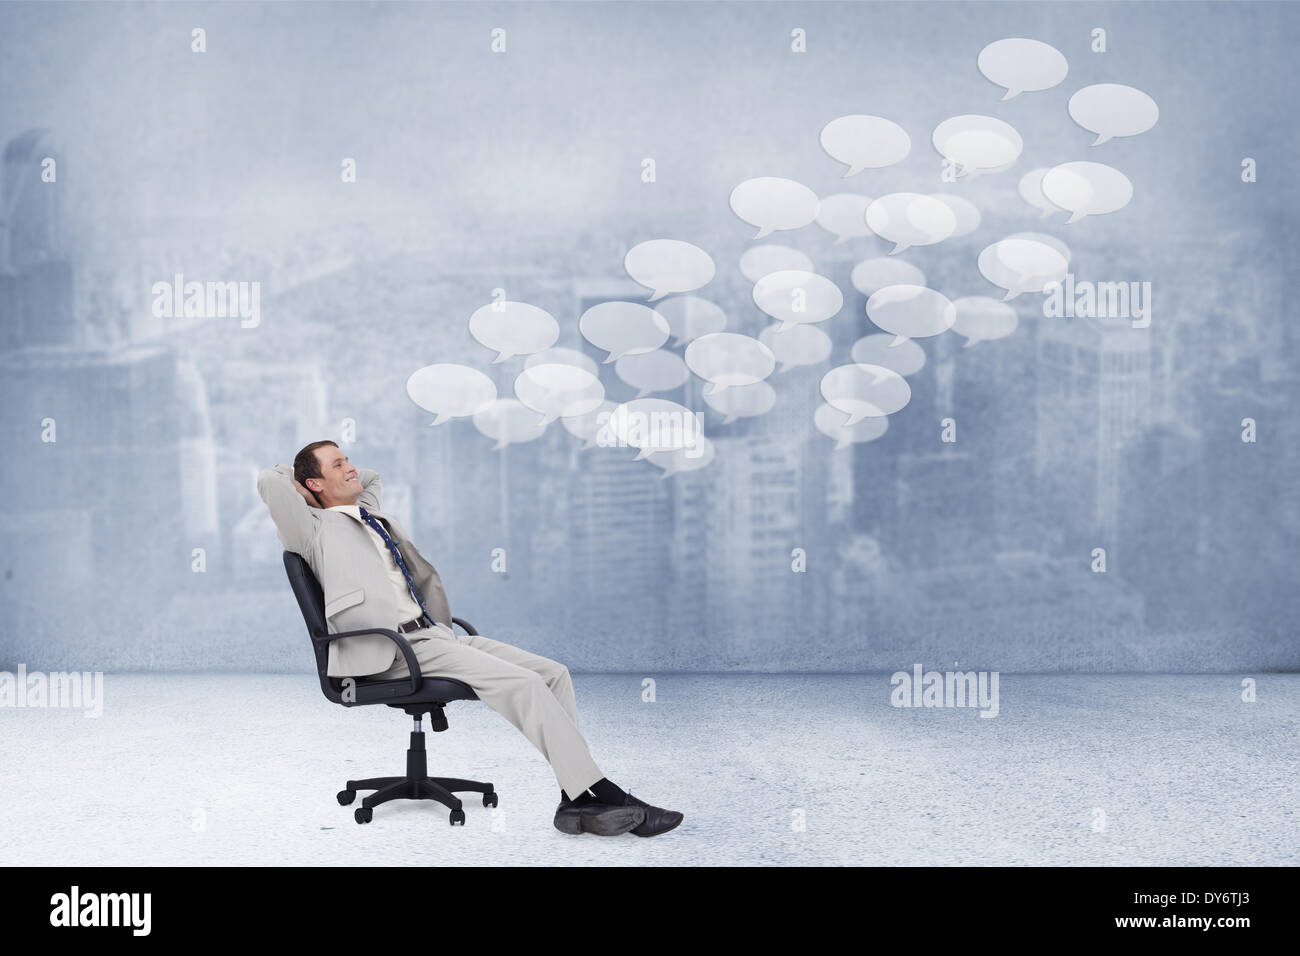 Composite image of side view of businessman leaning back in his chair Stock Photo